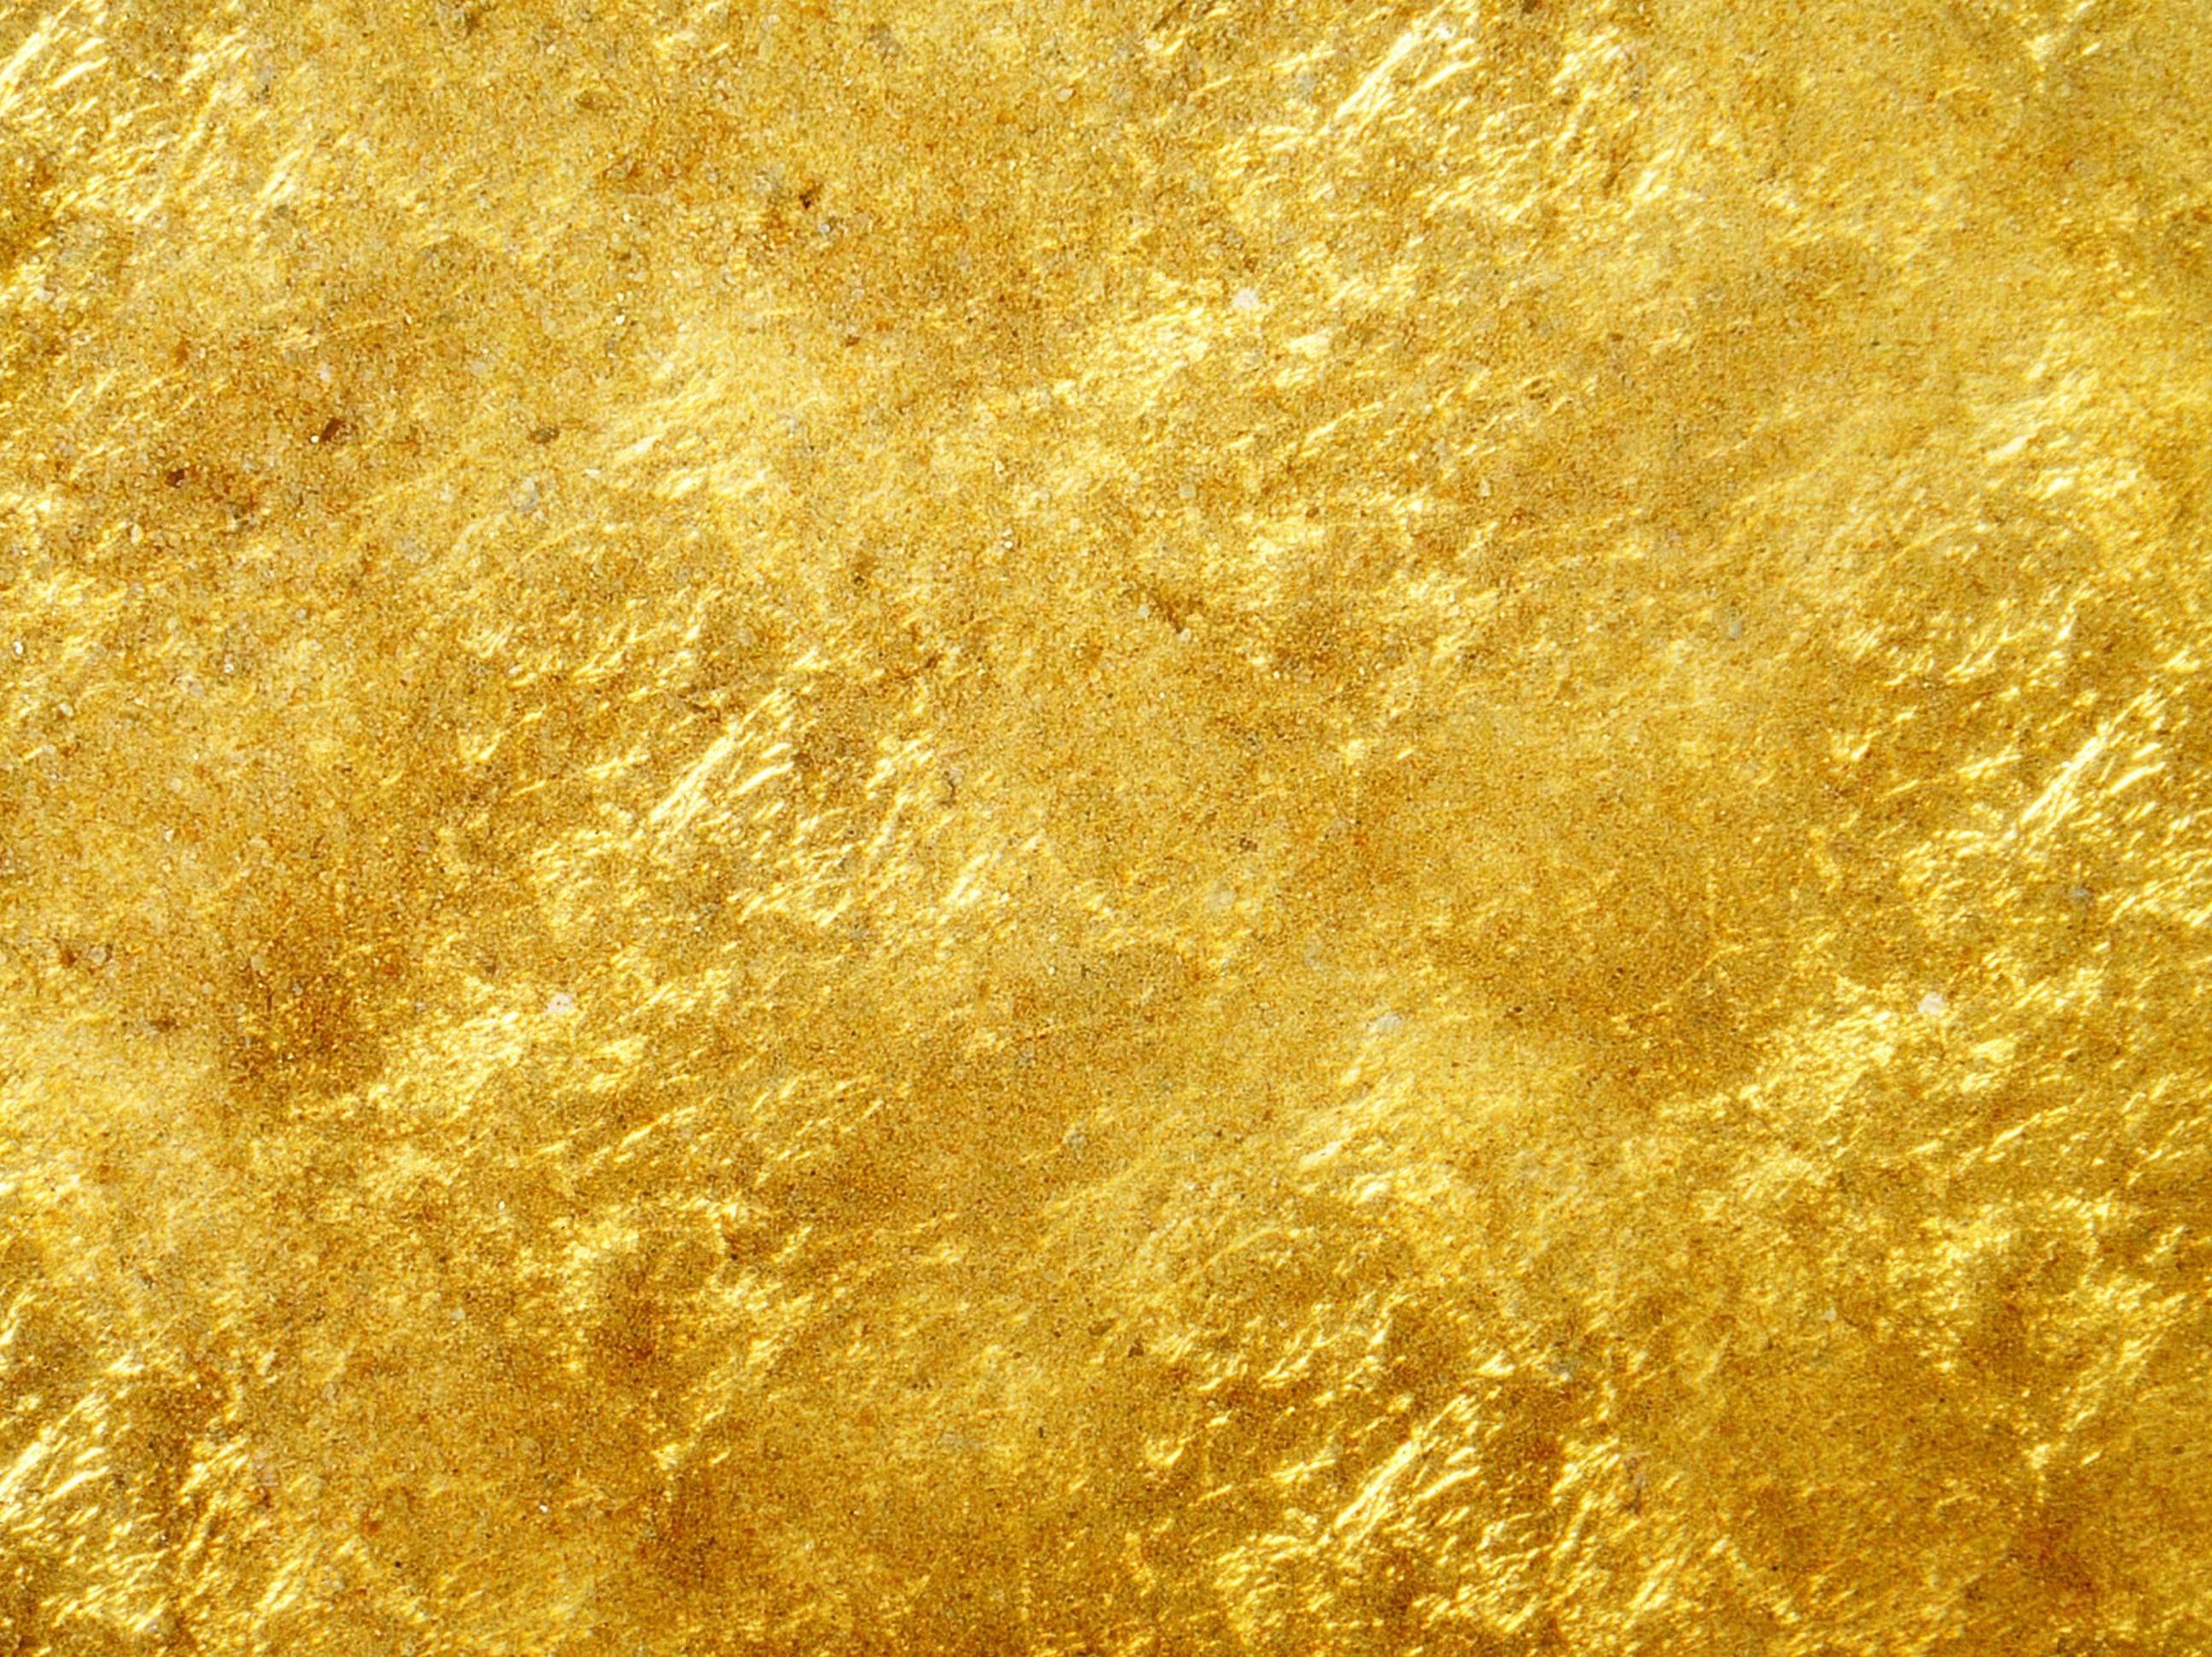 Shiny Gold background    Download free awesome backgrounds  